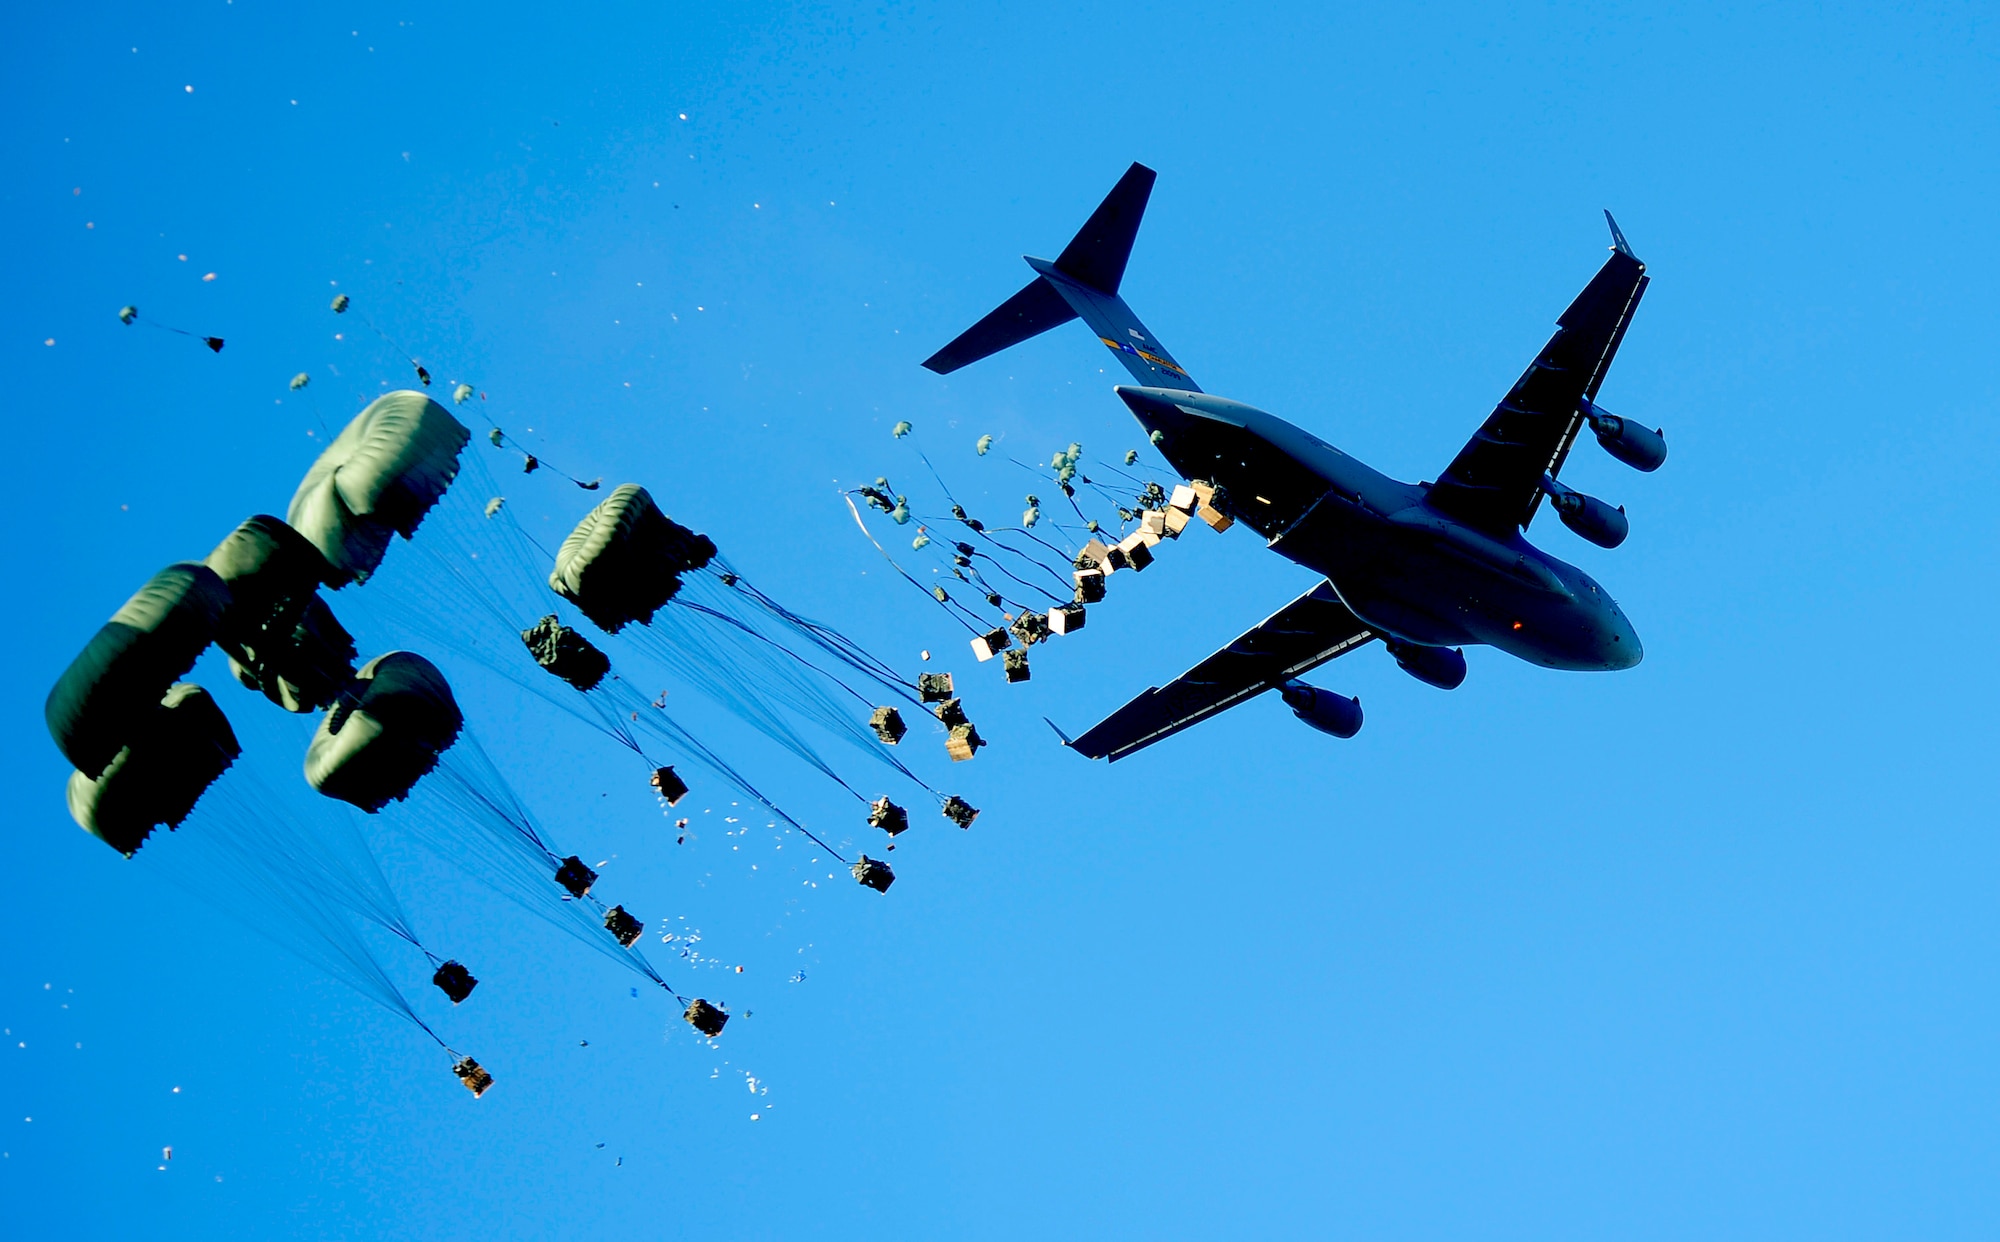 A U.S. Air Force C-17 Globemaster III aircraft drops pallets of water and food over Mirebalais, Haiti, Jan. 21, 2010, to be distributed by members of the United Nations.  Department of Defense assets have been deployed to assist in the Haiti relief effort following a 7.0 magnitude earthquake that that struck the country Jan. 12, 2010.  The aircraft is from the 437th Air Wing out of Charleston Air Force Base, S.C. (DoD photo by Tech. Sgt. James L. Harper Jr., U.S. Air Force/Released)